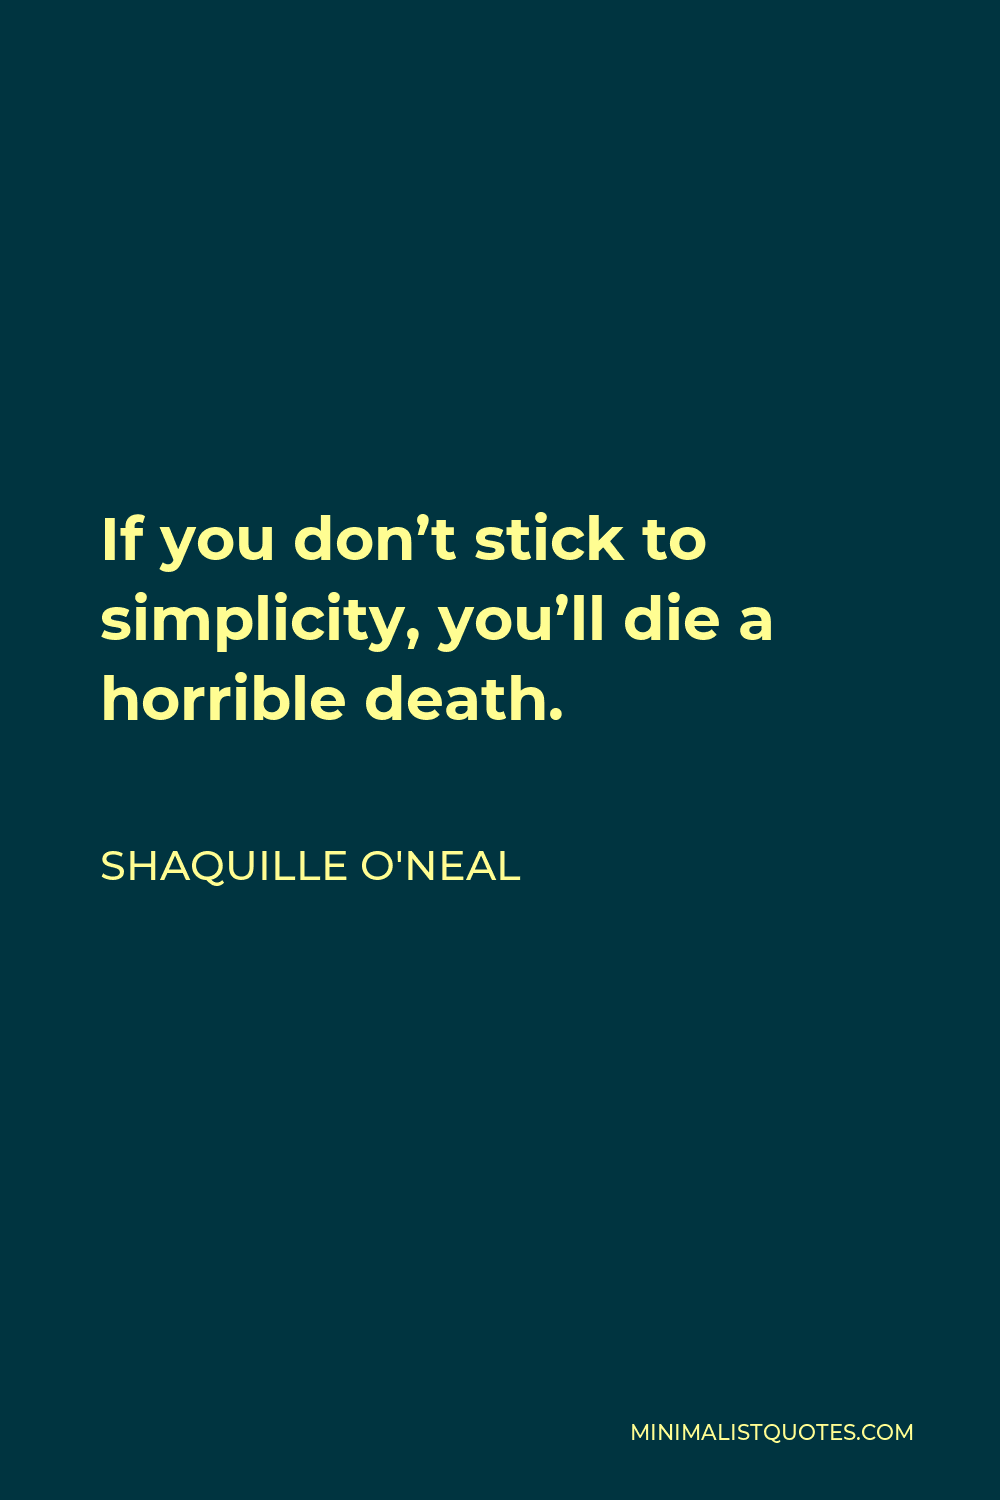 Shaquille O'Neal Quote - If you don’t stick to simplicity, you’ll die a horrible death.